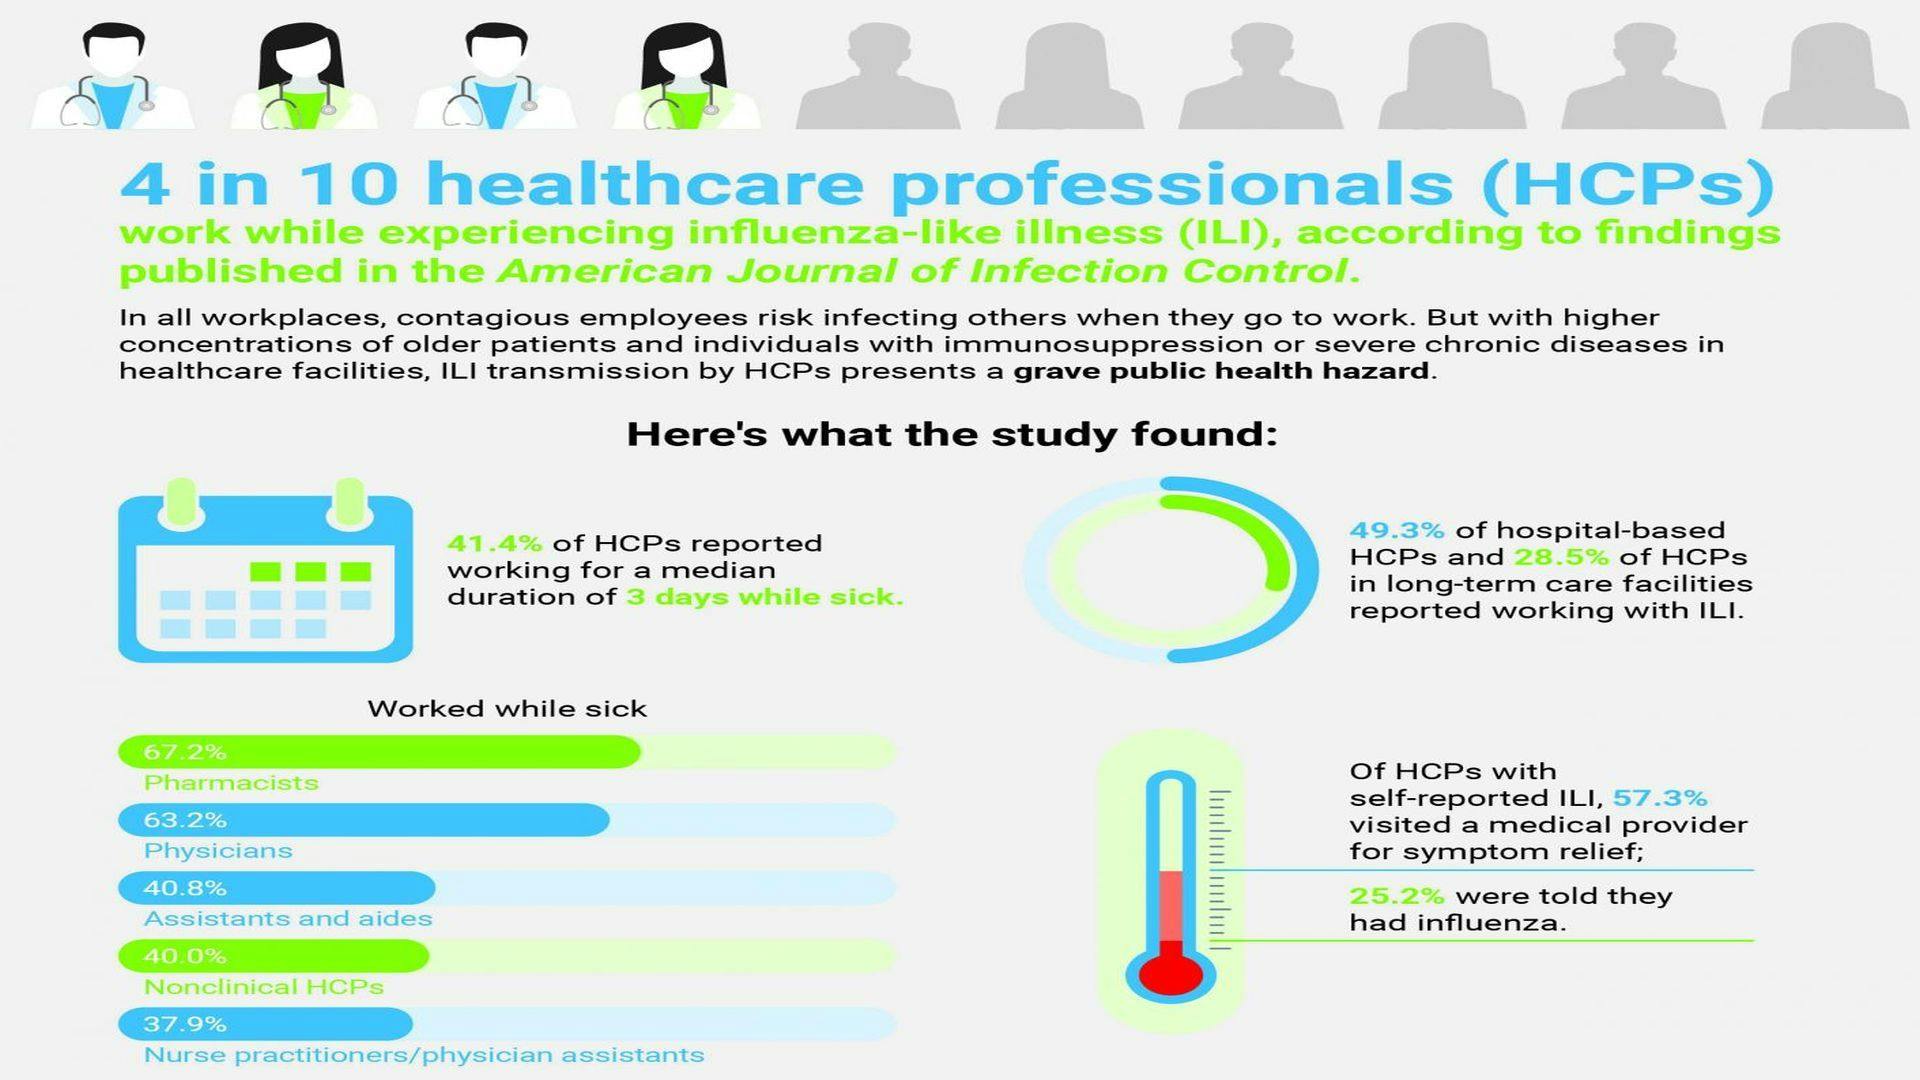 Survey Finds 4 in 10 Healthcare Professionals Work While Sick